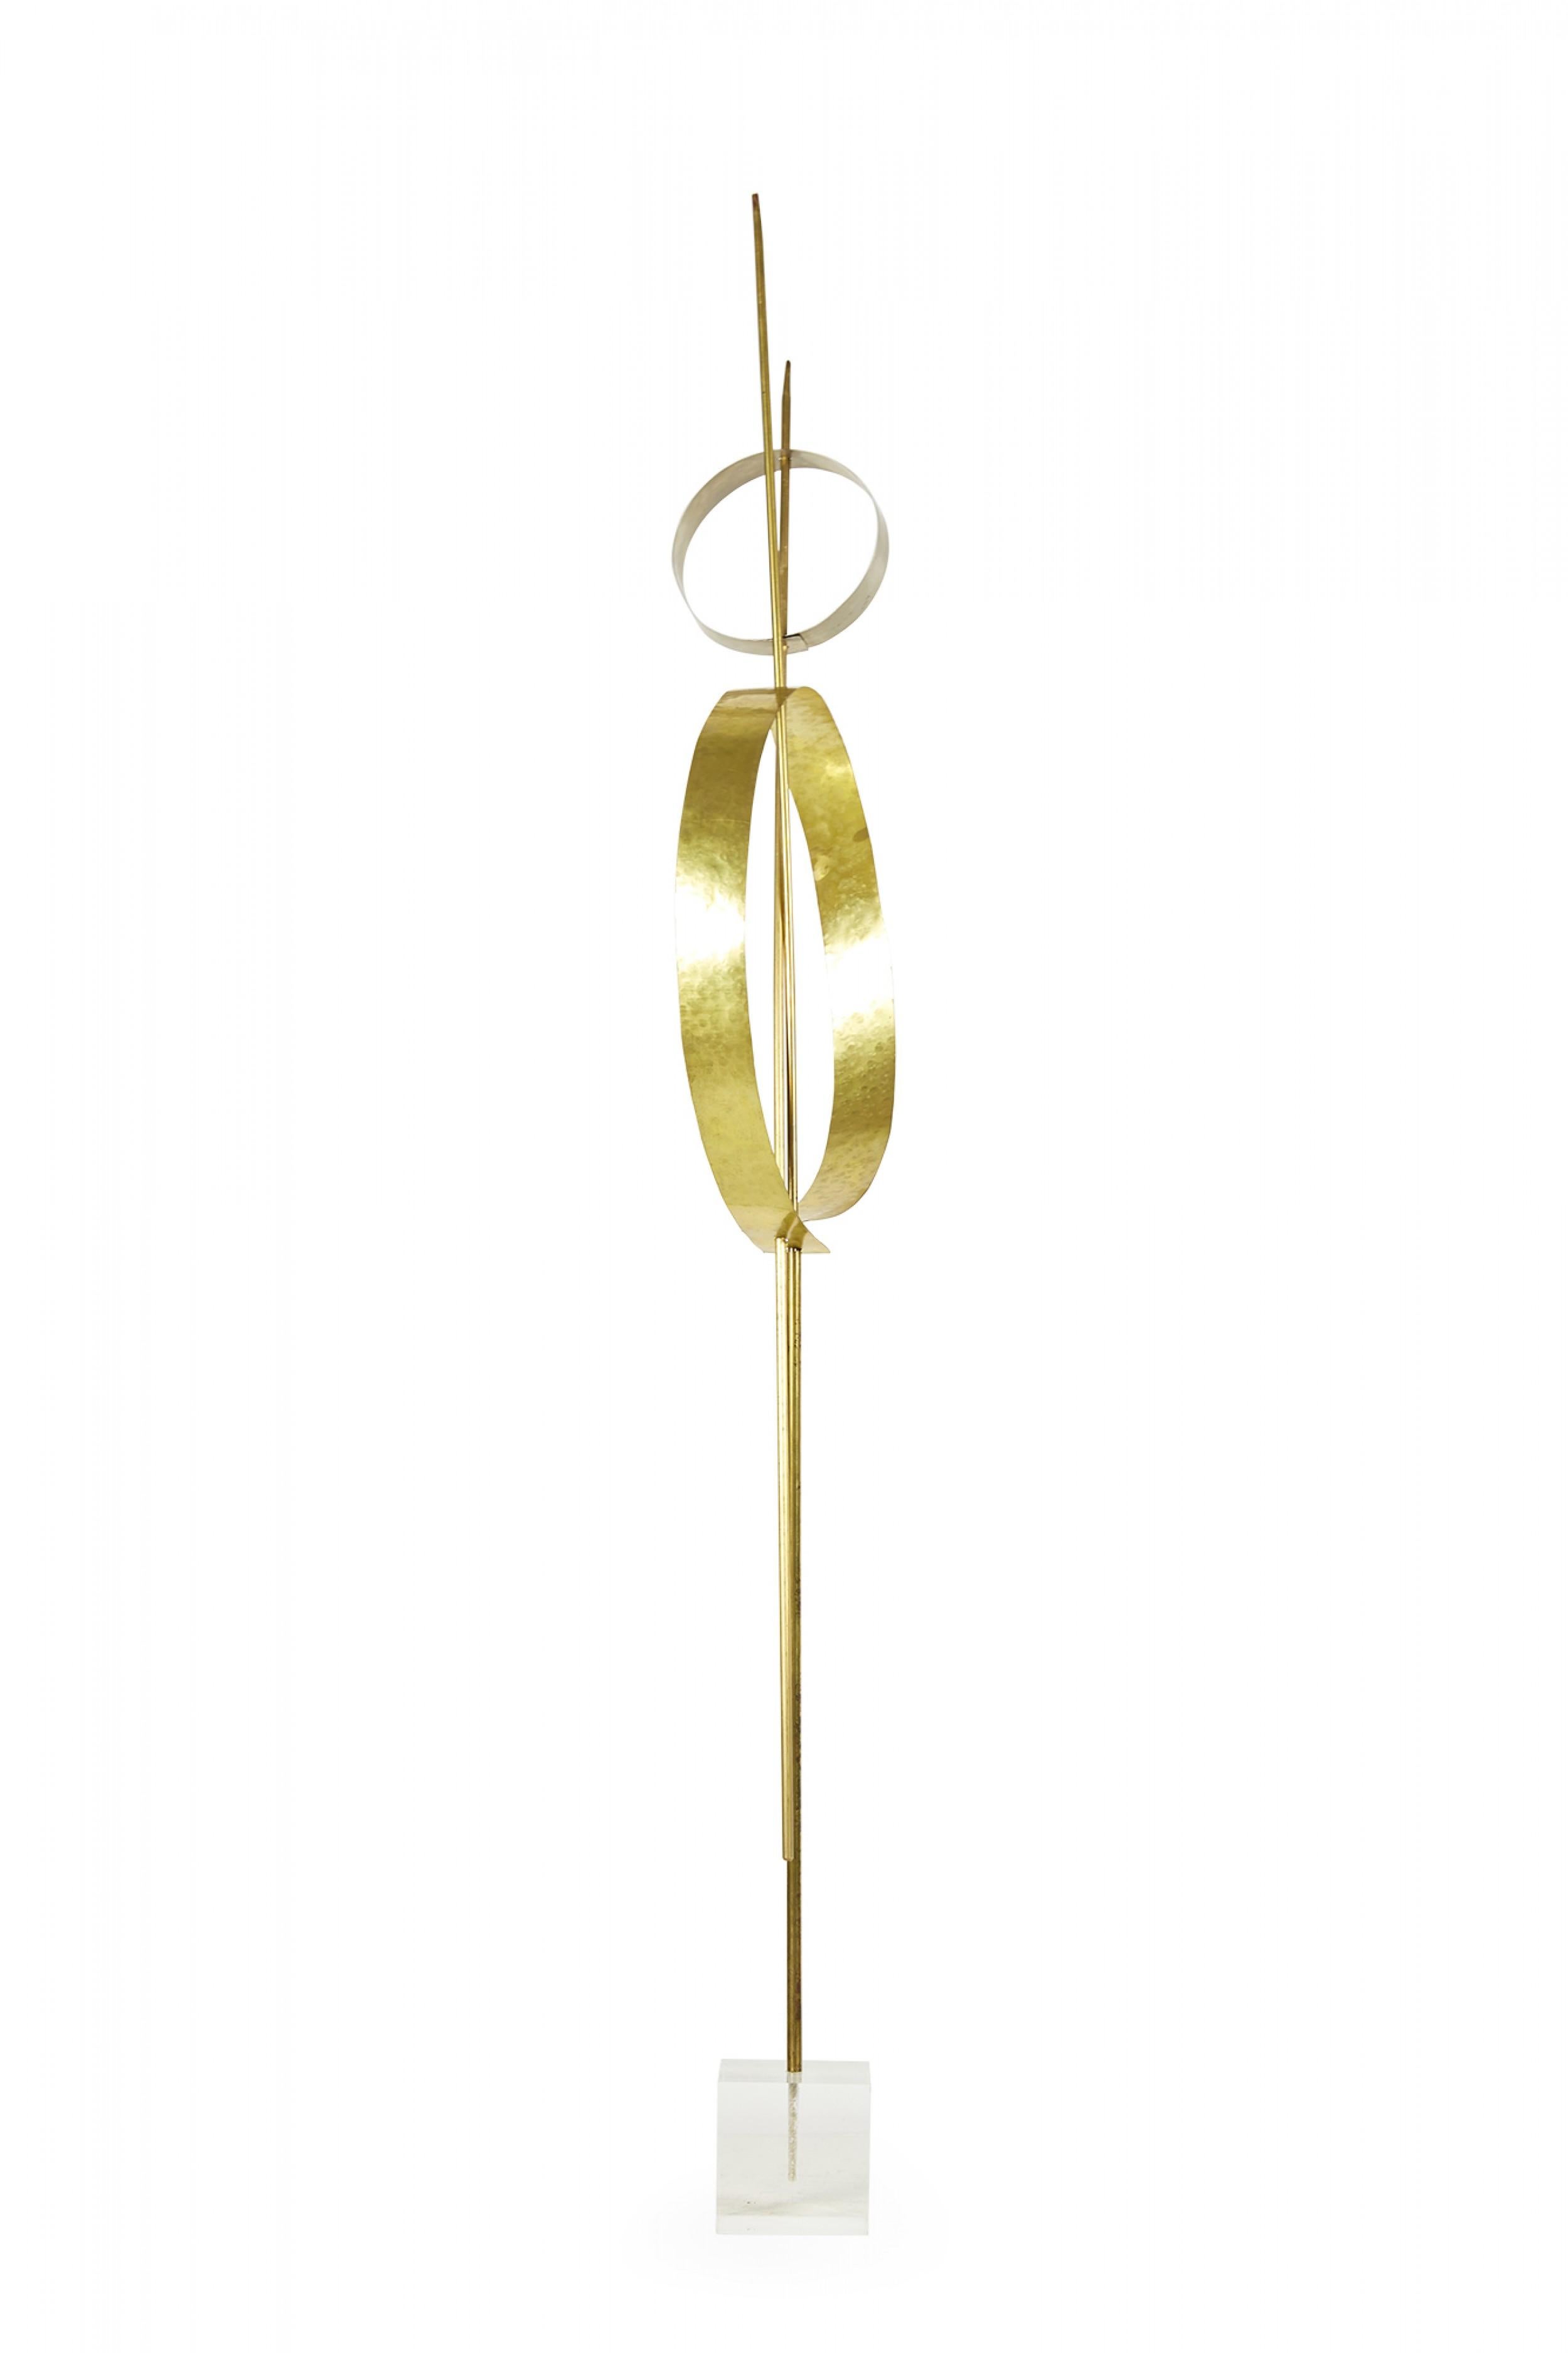 Contemporary abstract sculpture comprised of two nickel and brass circular pieces mounted on two intersecting brass rods, one of which is anchored in a lucite base, titled, 